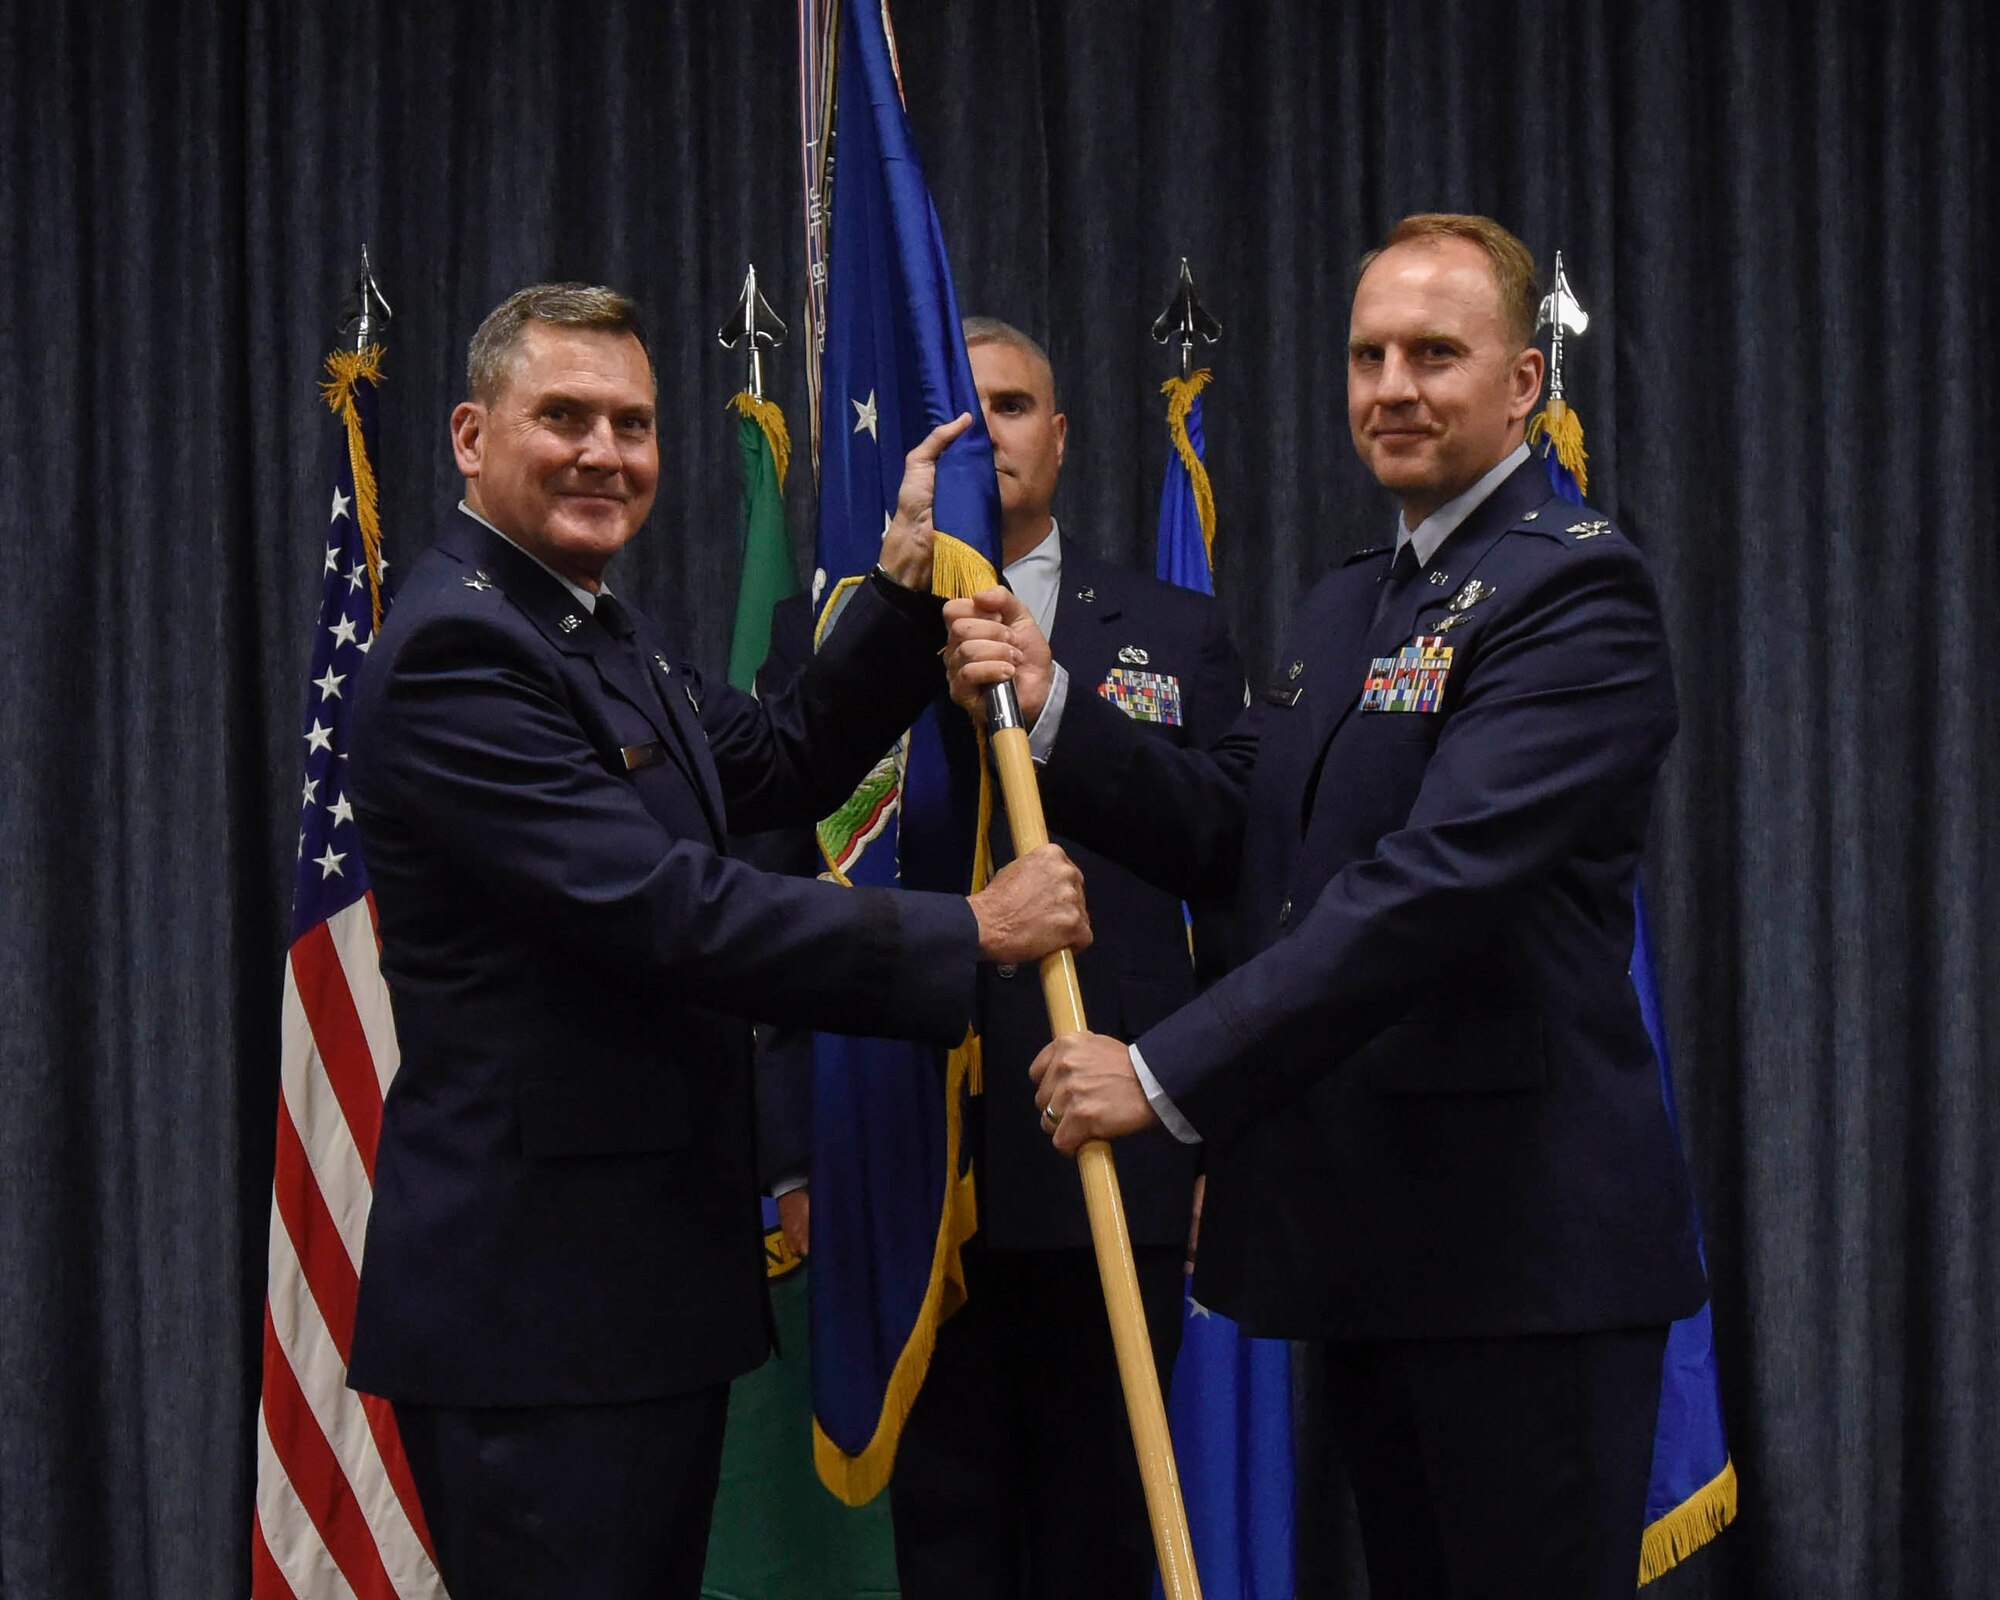 141st ARW Welcomes New Commander